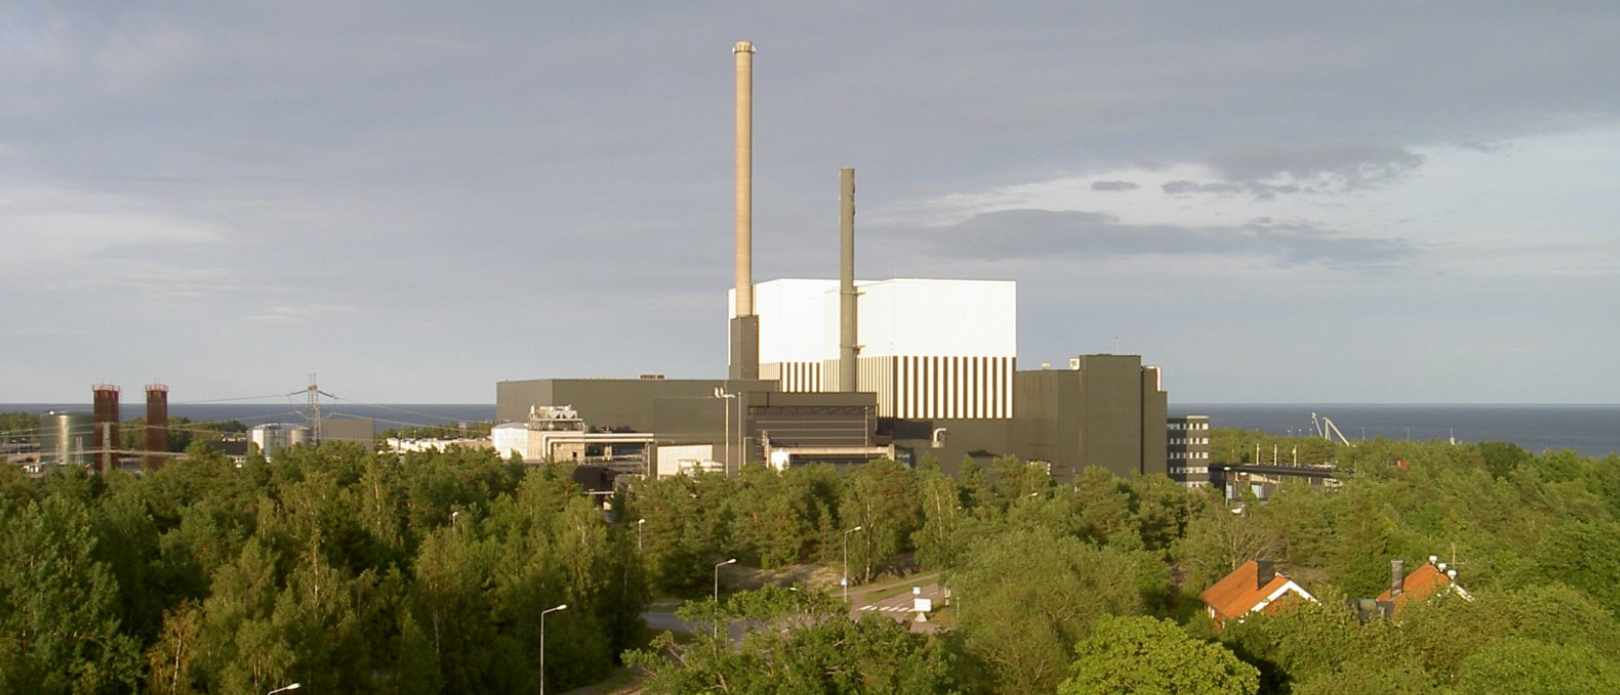 Picture of the Oskarshamn nuclear power plant.